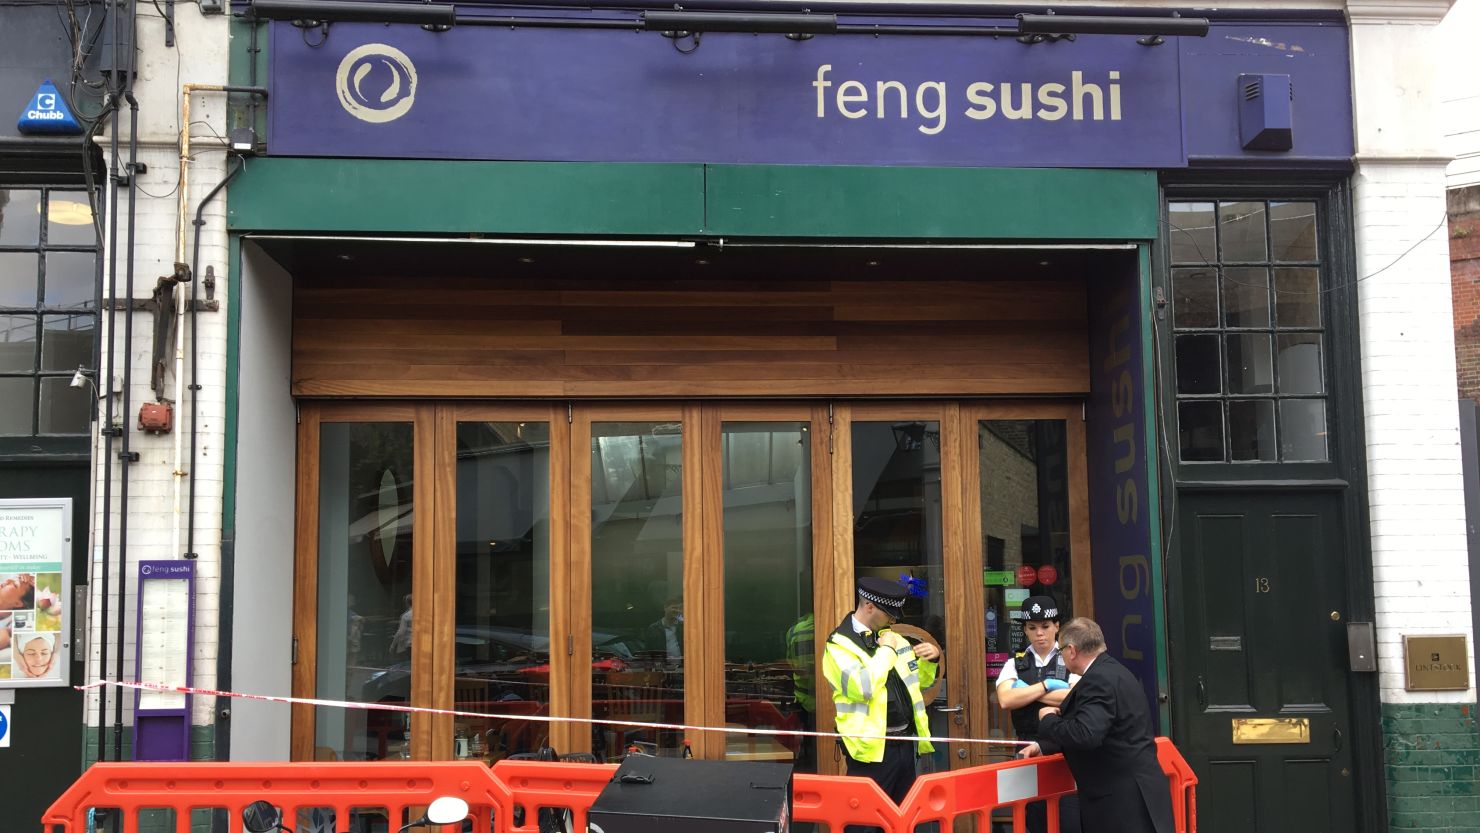 Police cordoned off the Feng Sushi restaurant in Borough Market on Thursday.